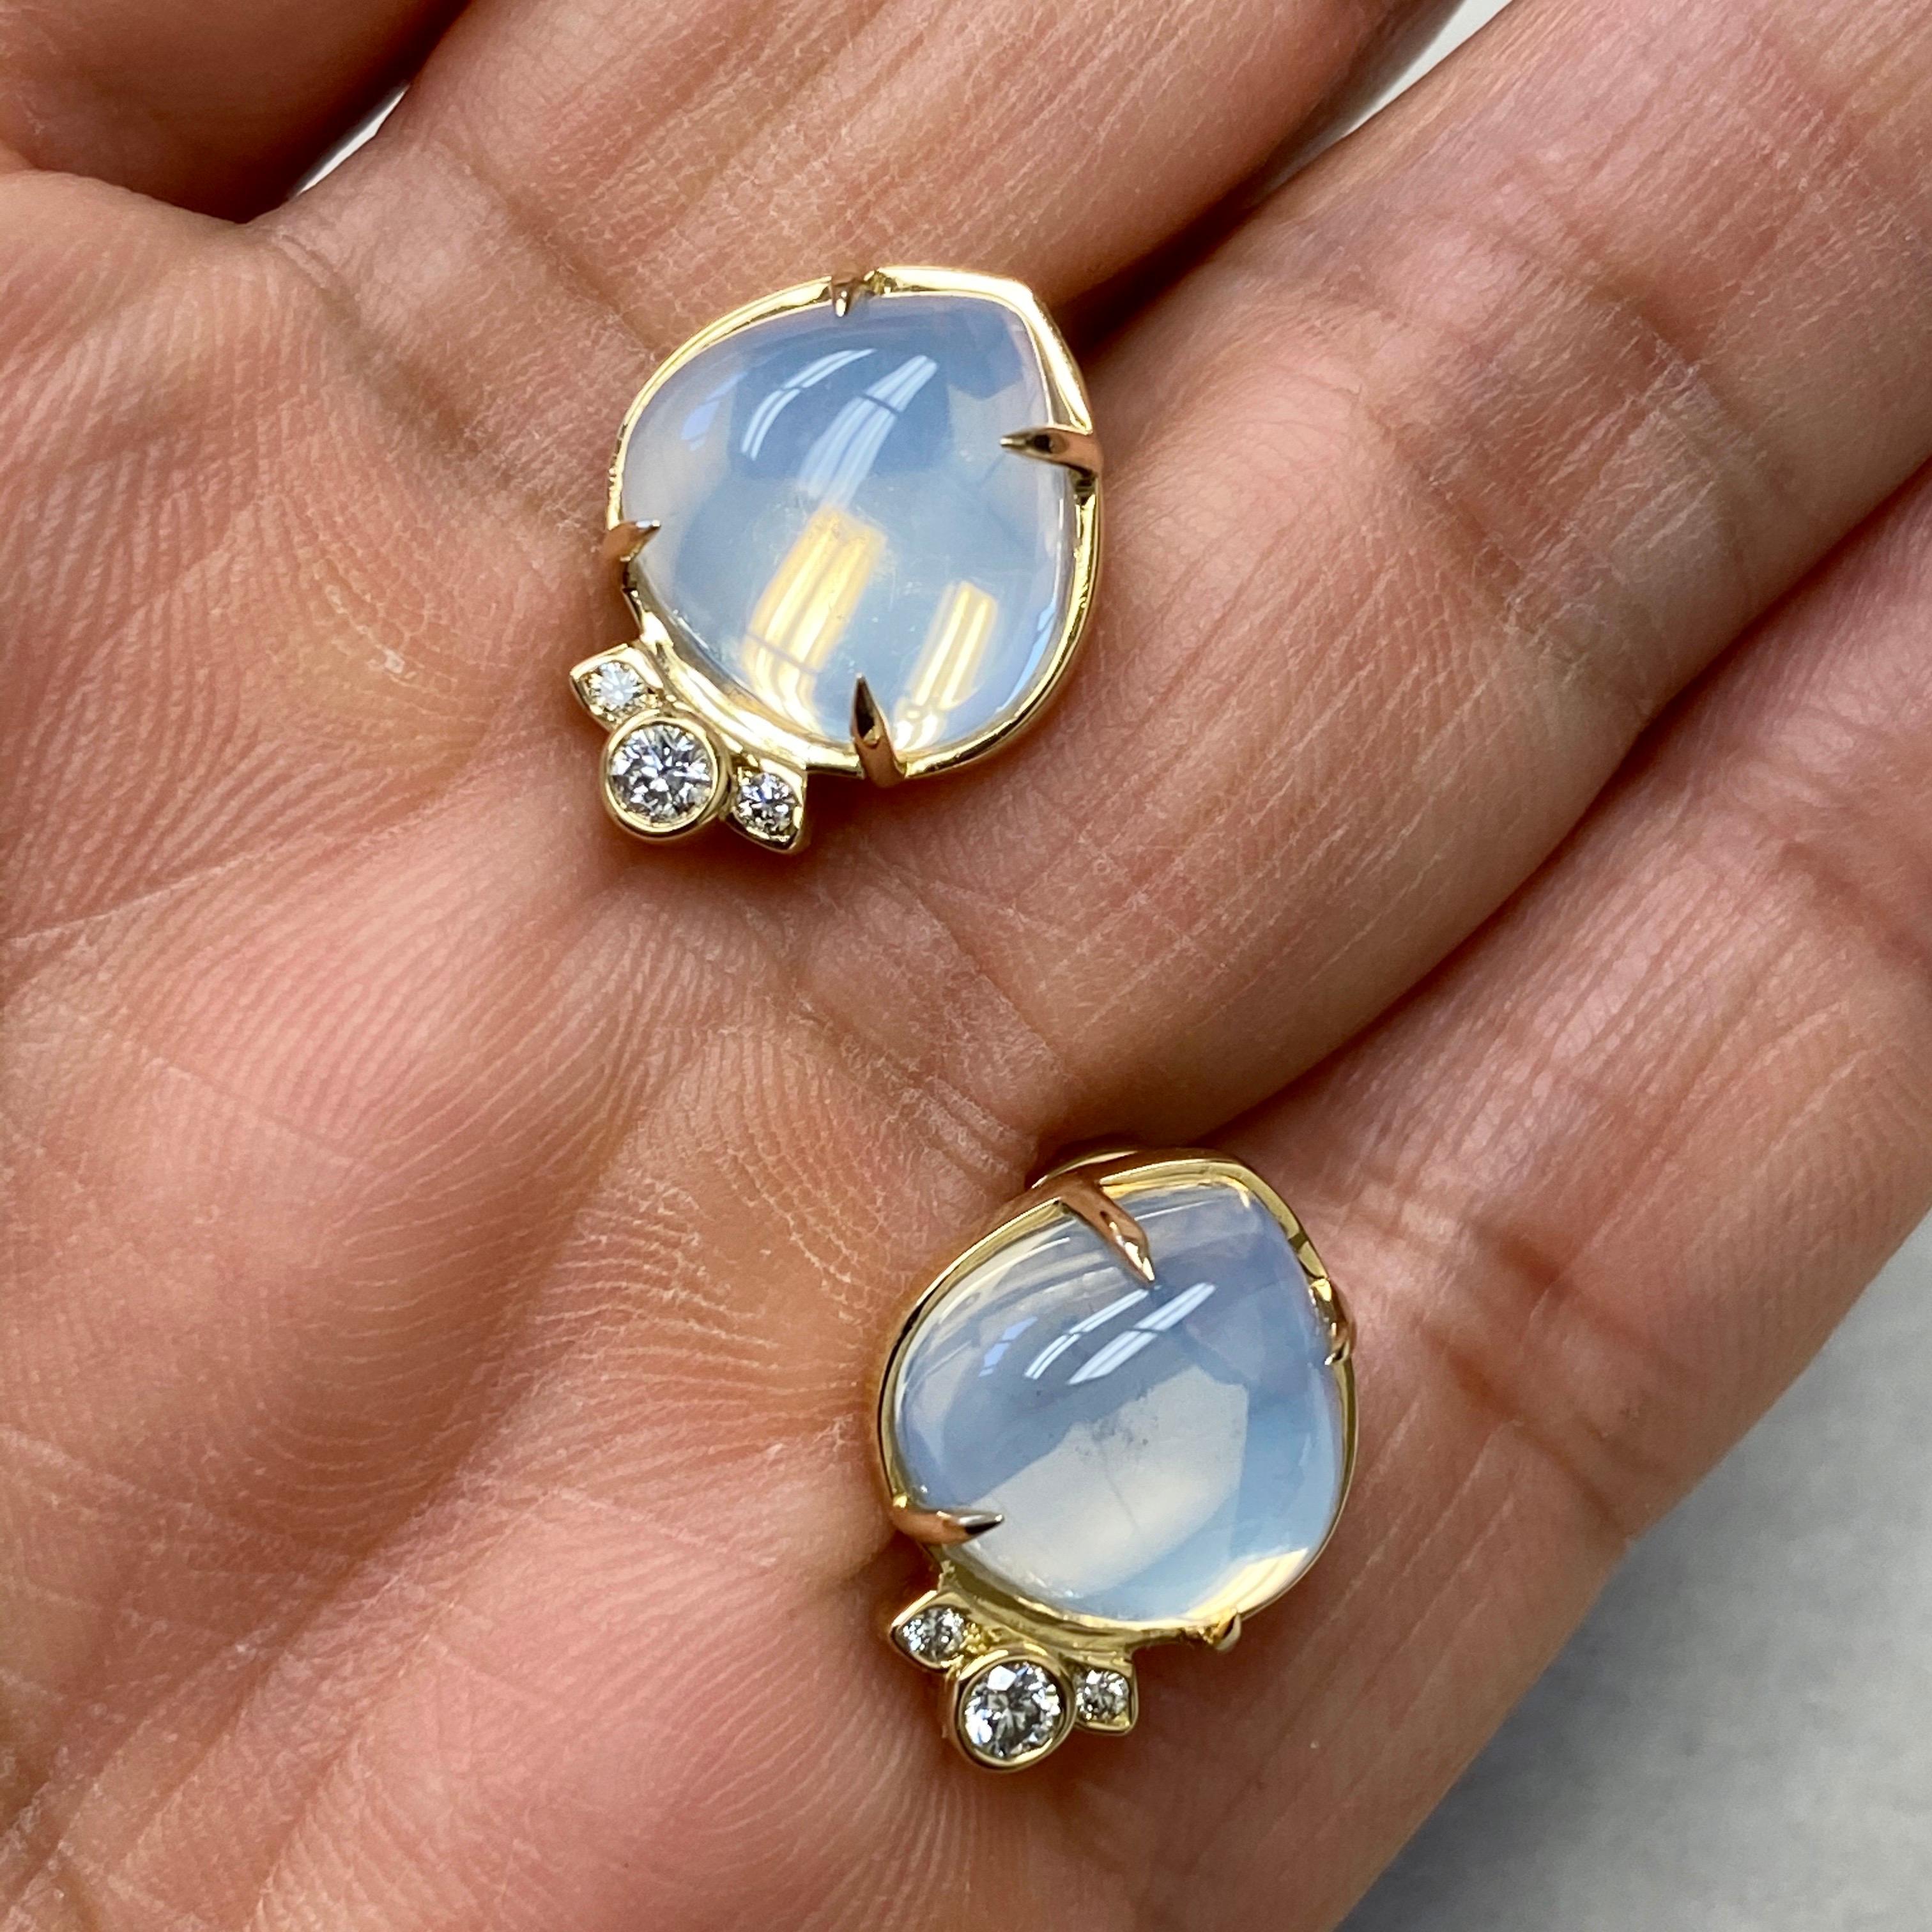 Created in 18 karat yellow gold
Moon Quartz 14 cts approx
Diamonds 0.15 cts approx
Omega clip-backs & posts
Limited Edition

Be the star of the evening with these glamorous Candy Blue Topaz & Diamond Earrings, handcrafted in a limited edition of 18